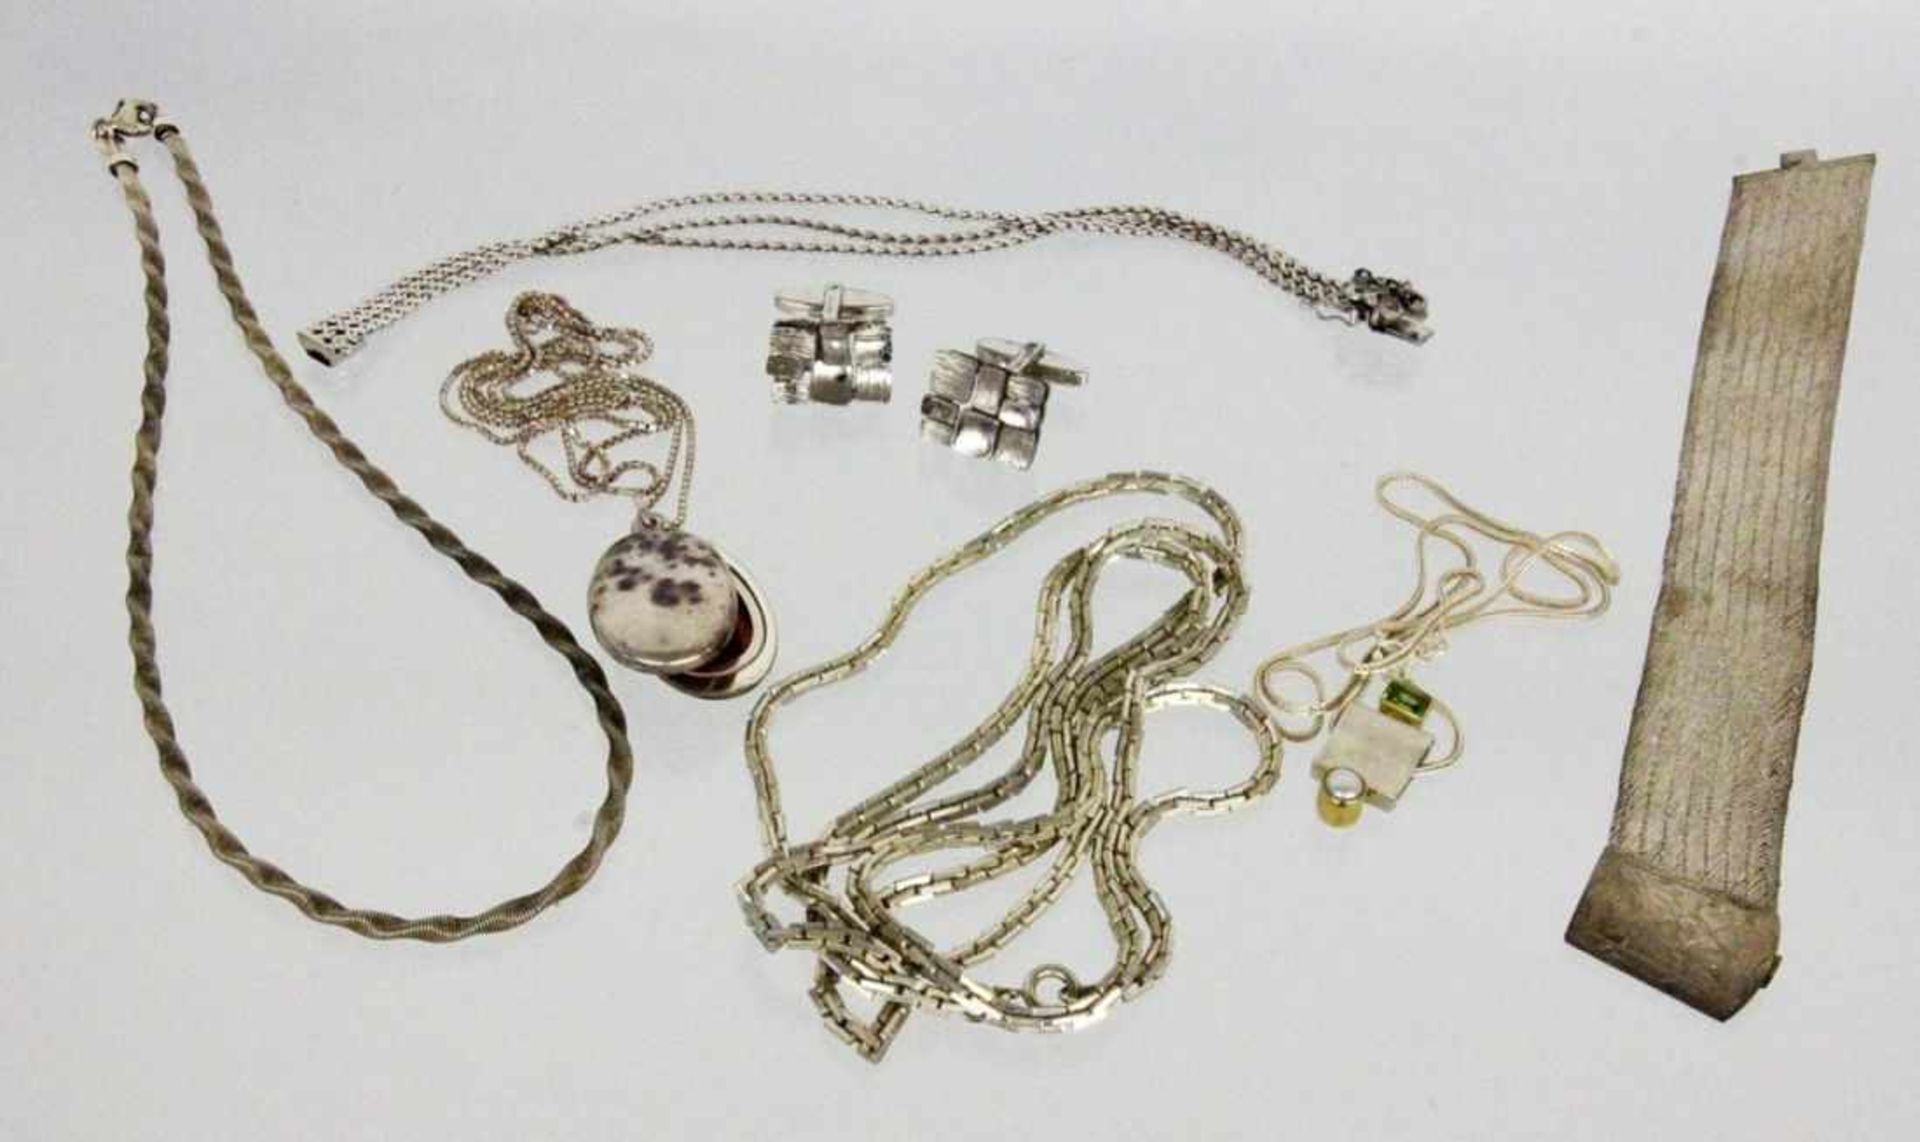 LOT 7 TEILE SILBERSCHMUCKBrutto ca. 126gA LOT OF 7 SILVER JEWELLERY ITEMS Gross weight approximately